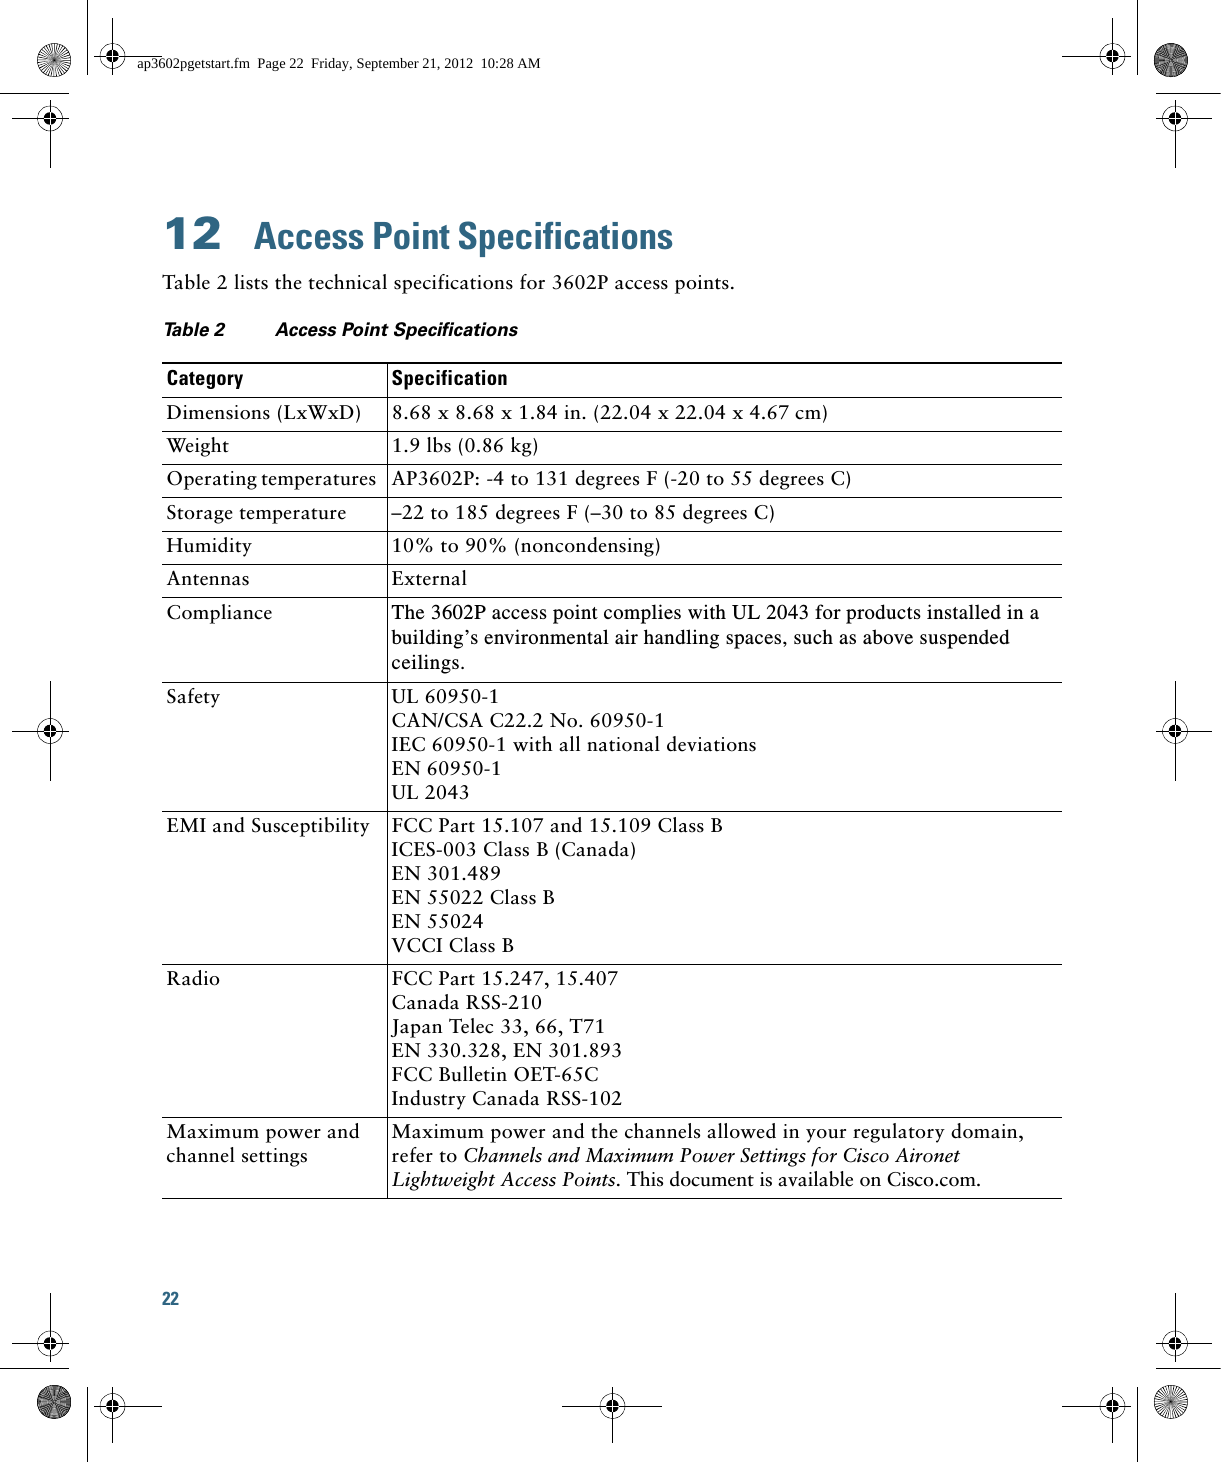 22 12  Access Point SpecificationsTable 2 lists the technical specifications for 3602P access points.Table 2 Access Point Specifications Category SpecificationDimensions (LxWxD) 8.68 x 8.68 x 1.84 in. (22.04 x 22.04 x 4.67 cm) Weight 1.9 lbs (0.86 kg)Operating temperatures AP3602P: -4 to 131 degrees F (-20 to 55 degrees C)Storage temperature –22 to 185 degrees F (–30 to 85 degrees C)Humidity 10% to 90% (noncondensing)Antennas ExternalCompliance The 3602P access point complies with UL 2043 for products installed in a building’s environmental air handling spaces, such as above suspended ceilings.Safety UL 60950-1CAN/CSA C22.2 No. 60950-1IEC 60950-1 with all national deviationsEN 60950-1UL 2043EMI and Susceptibility FCC Part 15.107 and 15.109 Class BICES-003 Class B (Canada)EN 301.489EN 55022 Class B EN 55024VCCI Class BRadio FCC Part 15.247, 15.407Canada RSS-210Japan Telec 33, 66, T71EN 330.328, EN 301.893FCC Bulletin OET-65CIndustry Canada RSS-102Maximum power and channel settingsMaximum power and the channels allowed in your regulatory domain, refer to Channels and Maximum Power Settings for Cisco Aironet Lightweight Access Points. This document is available on Cisco.com.ap3602pgetstart.fm  Page 22  Friday, September 21, 2012  10:28 AM